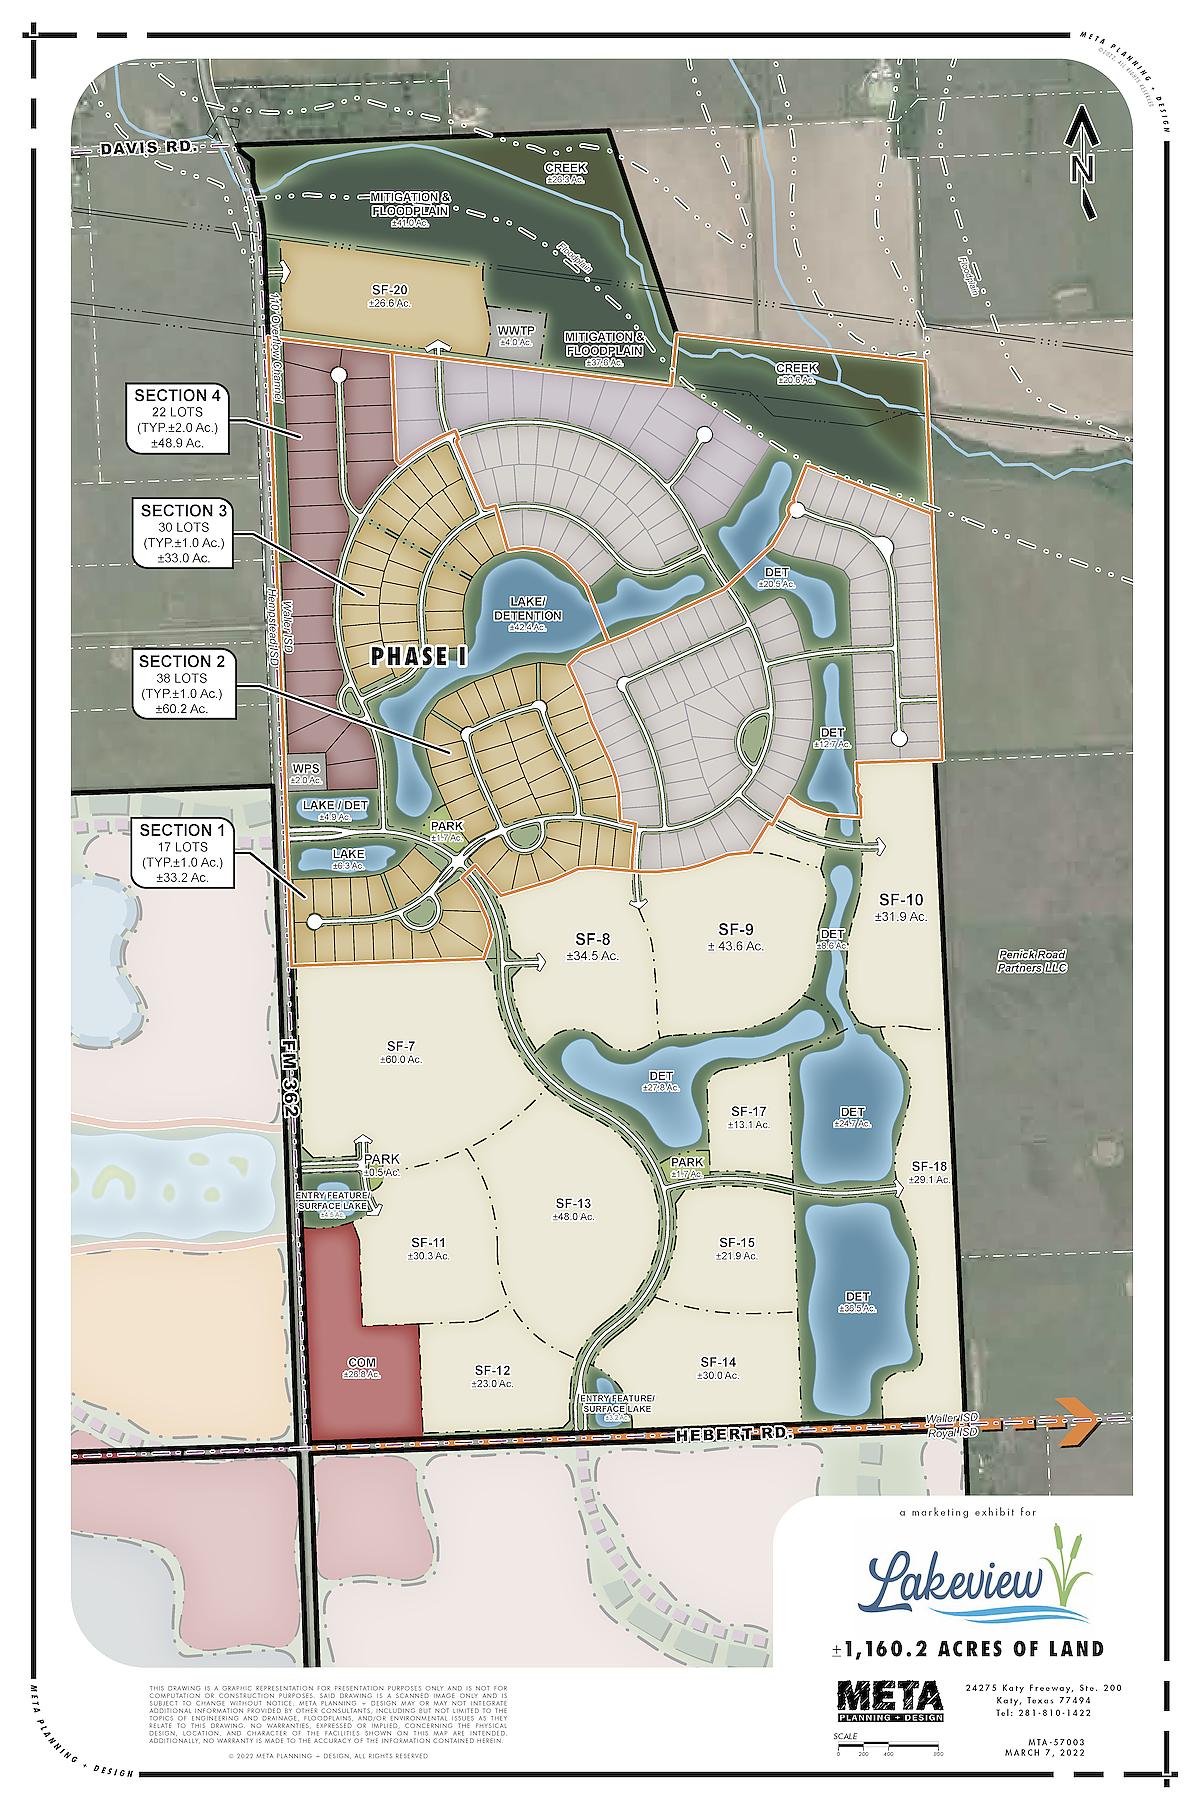 Lakeview - New Master Planned Community Breaks Ground